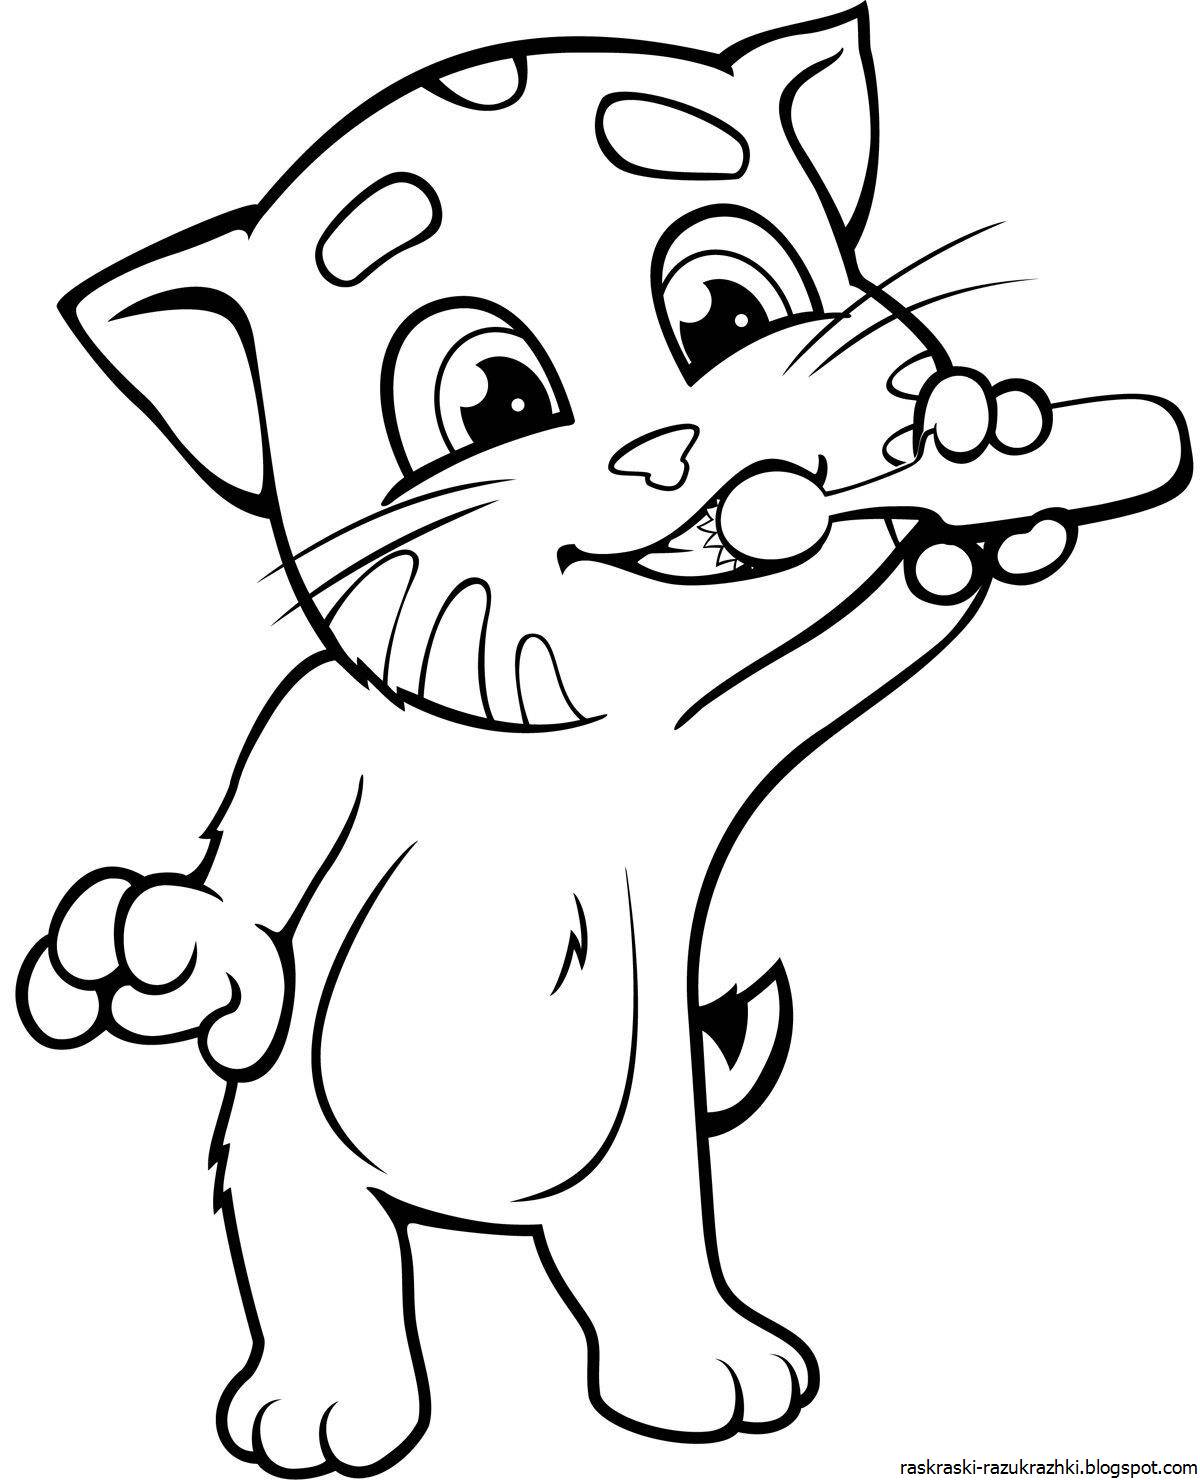 Exciting coloring page